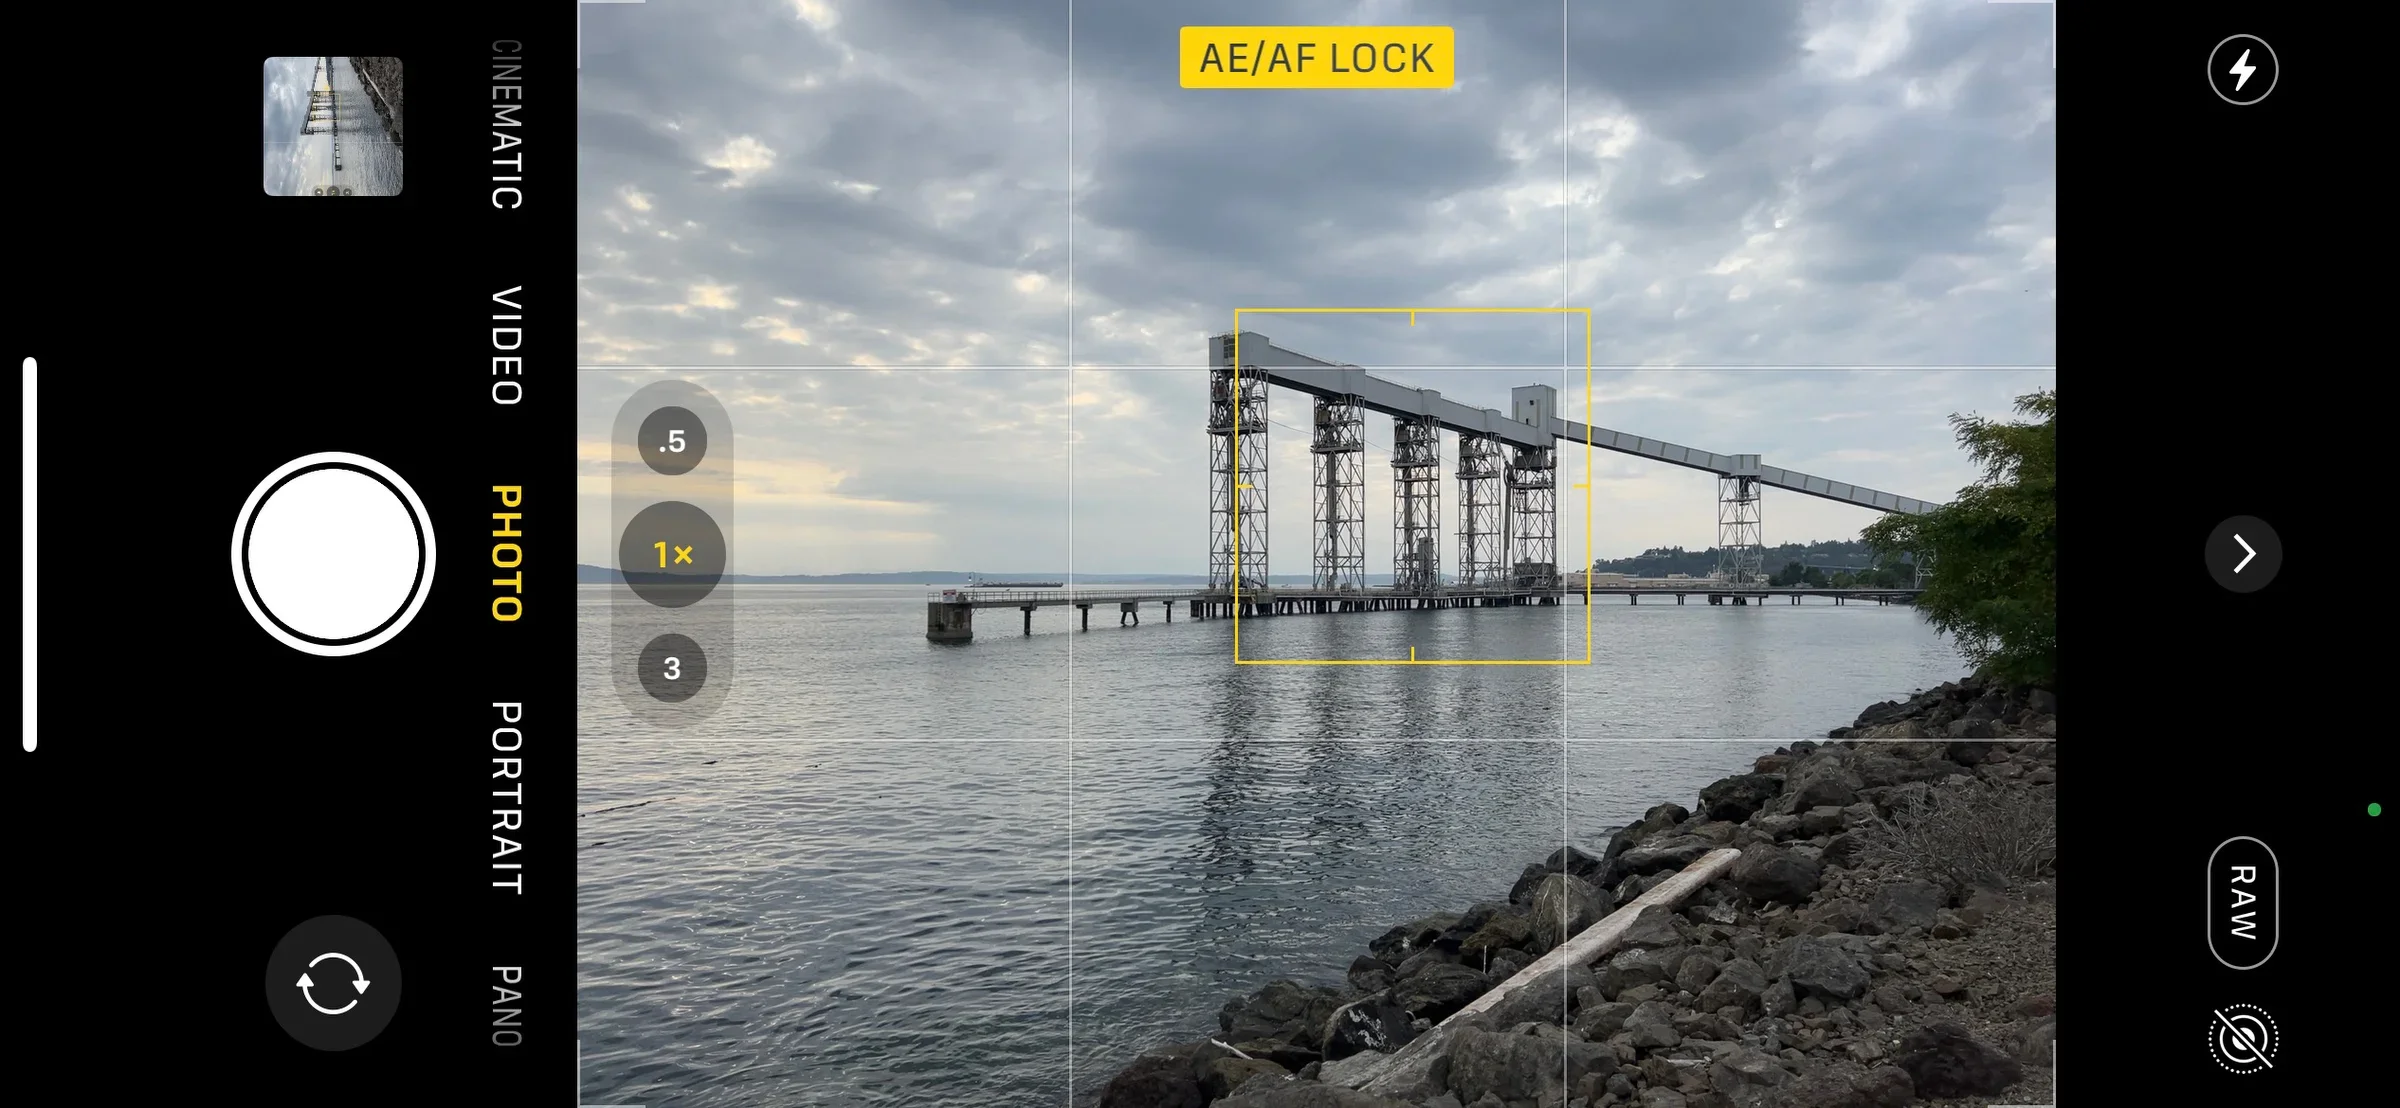 Your smartphone camera has great hidden features—here’s how to find them